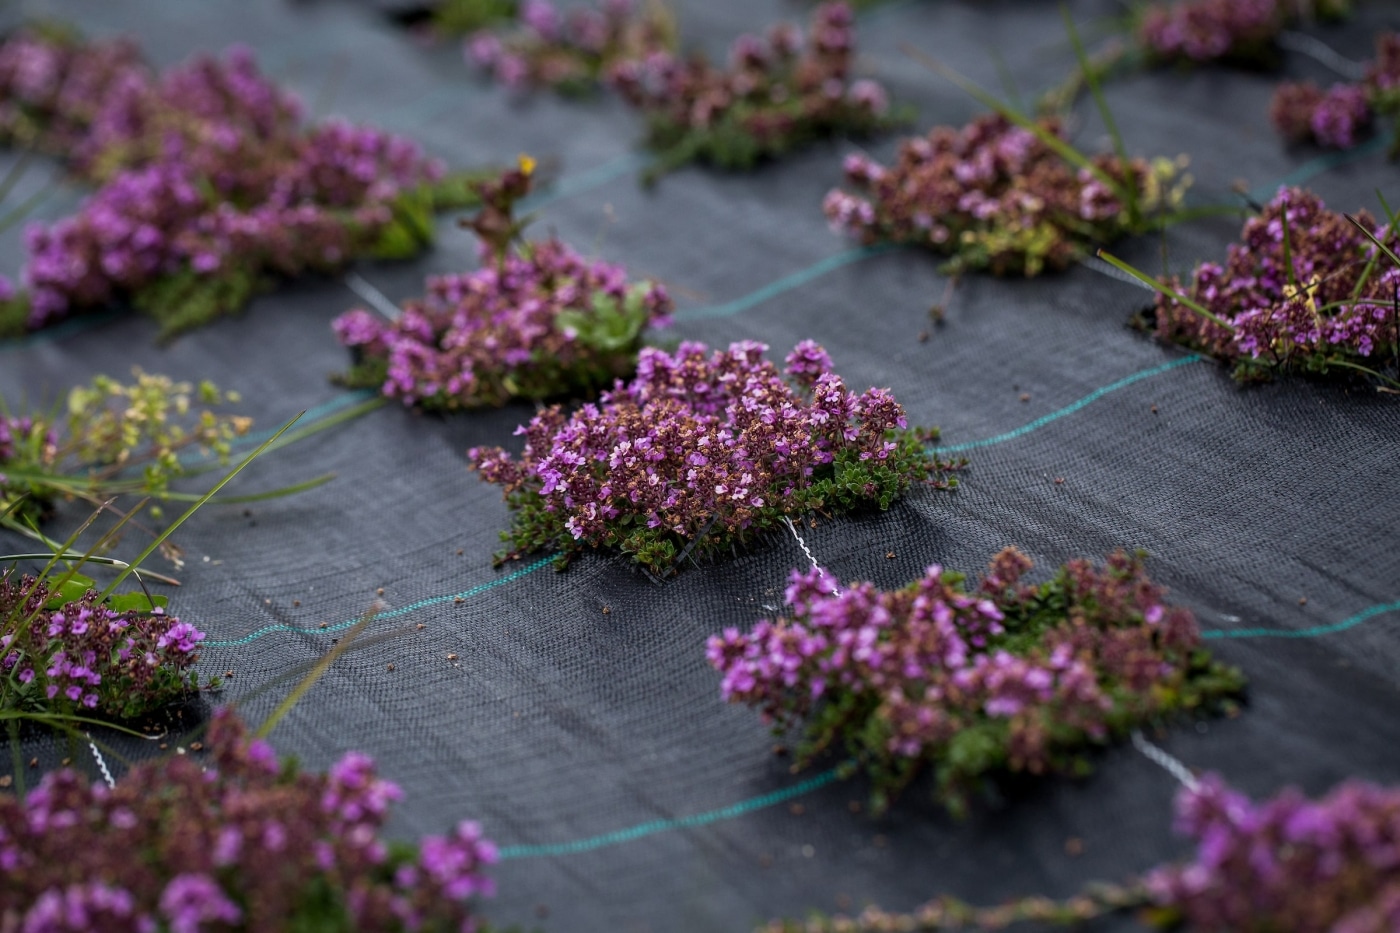 Thyme growing at Upernaviarsuk research station in South Greenland. Photo by Mads Pihl - Visit Greenland.